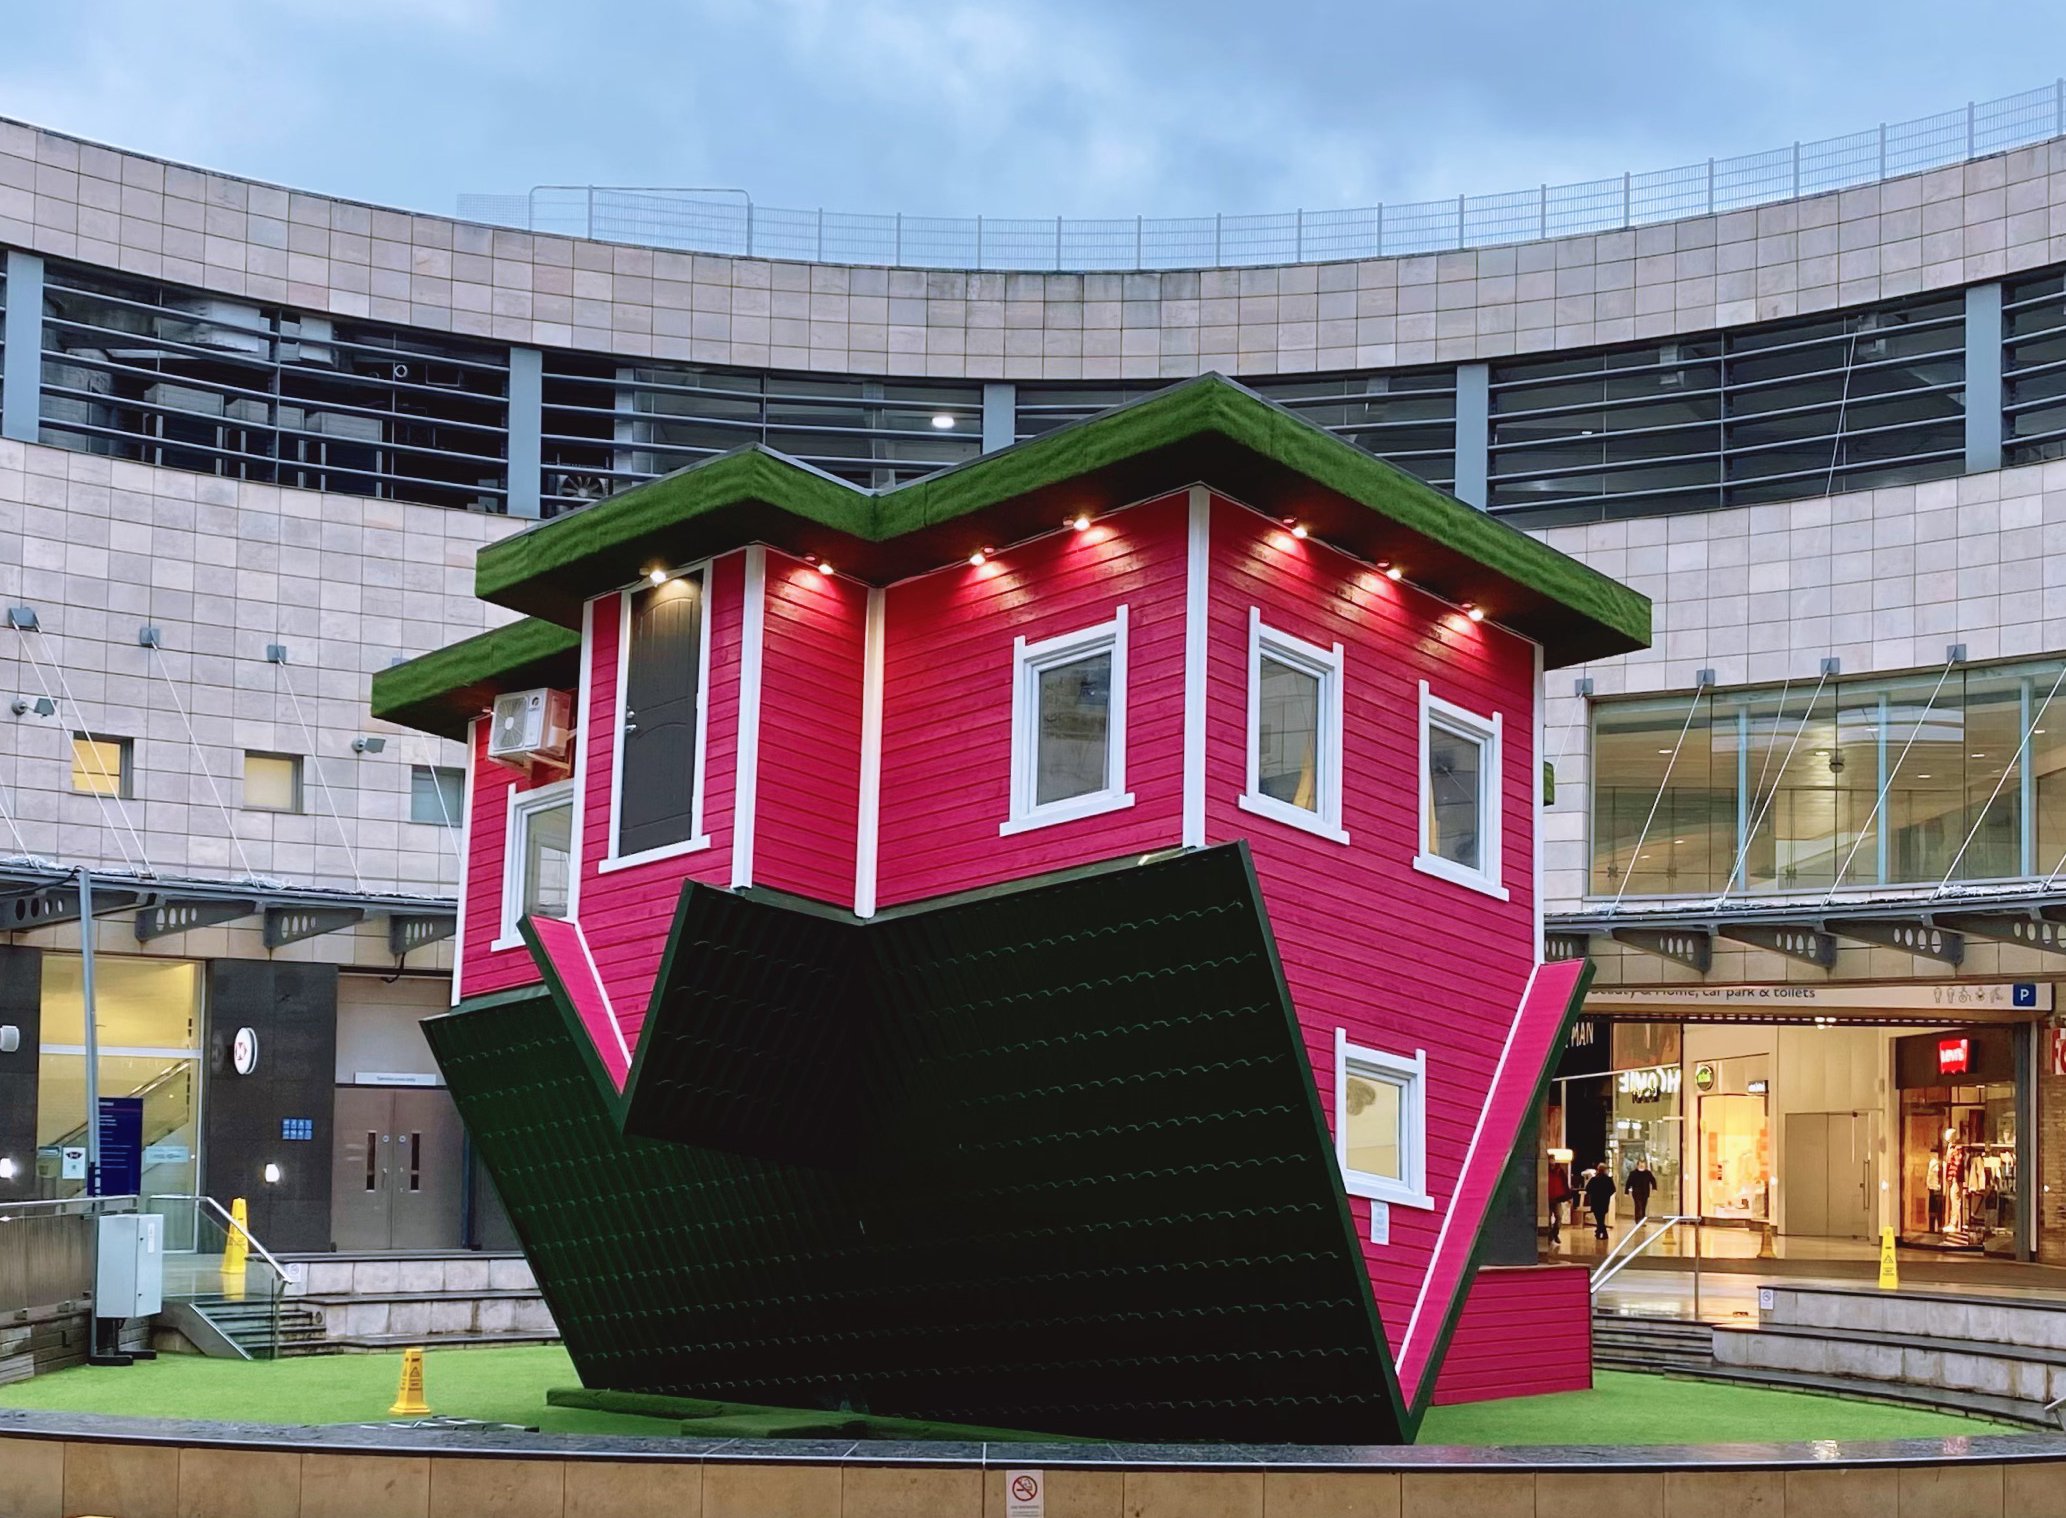 Upside Down House opens in Midsummer Place